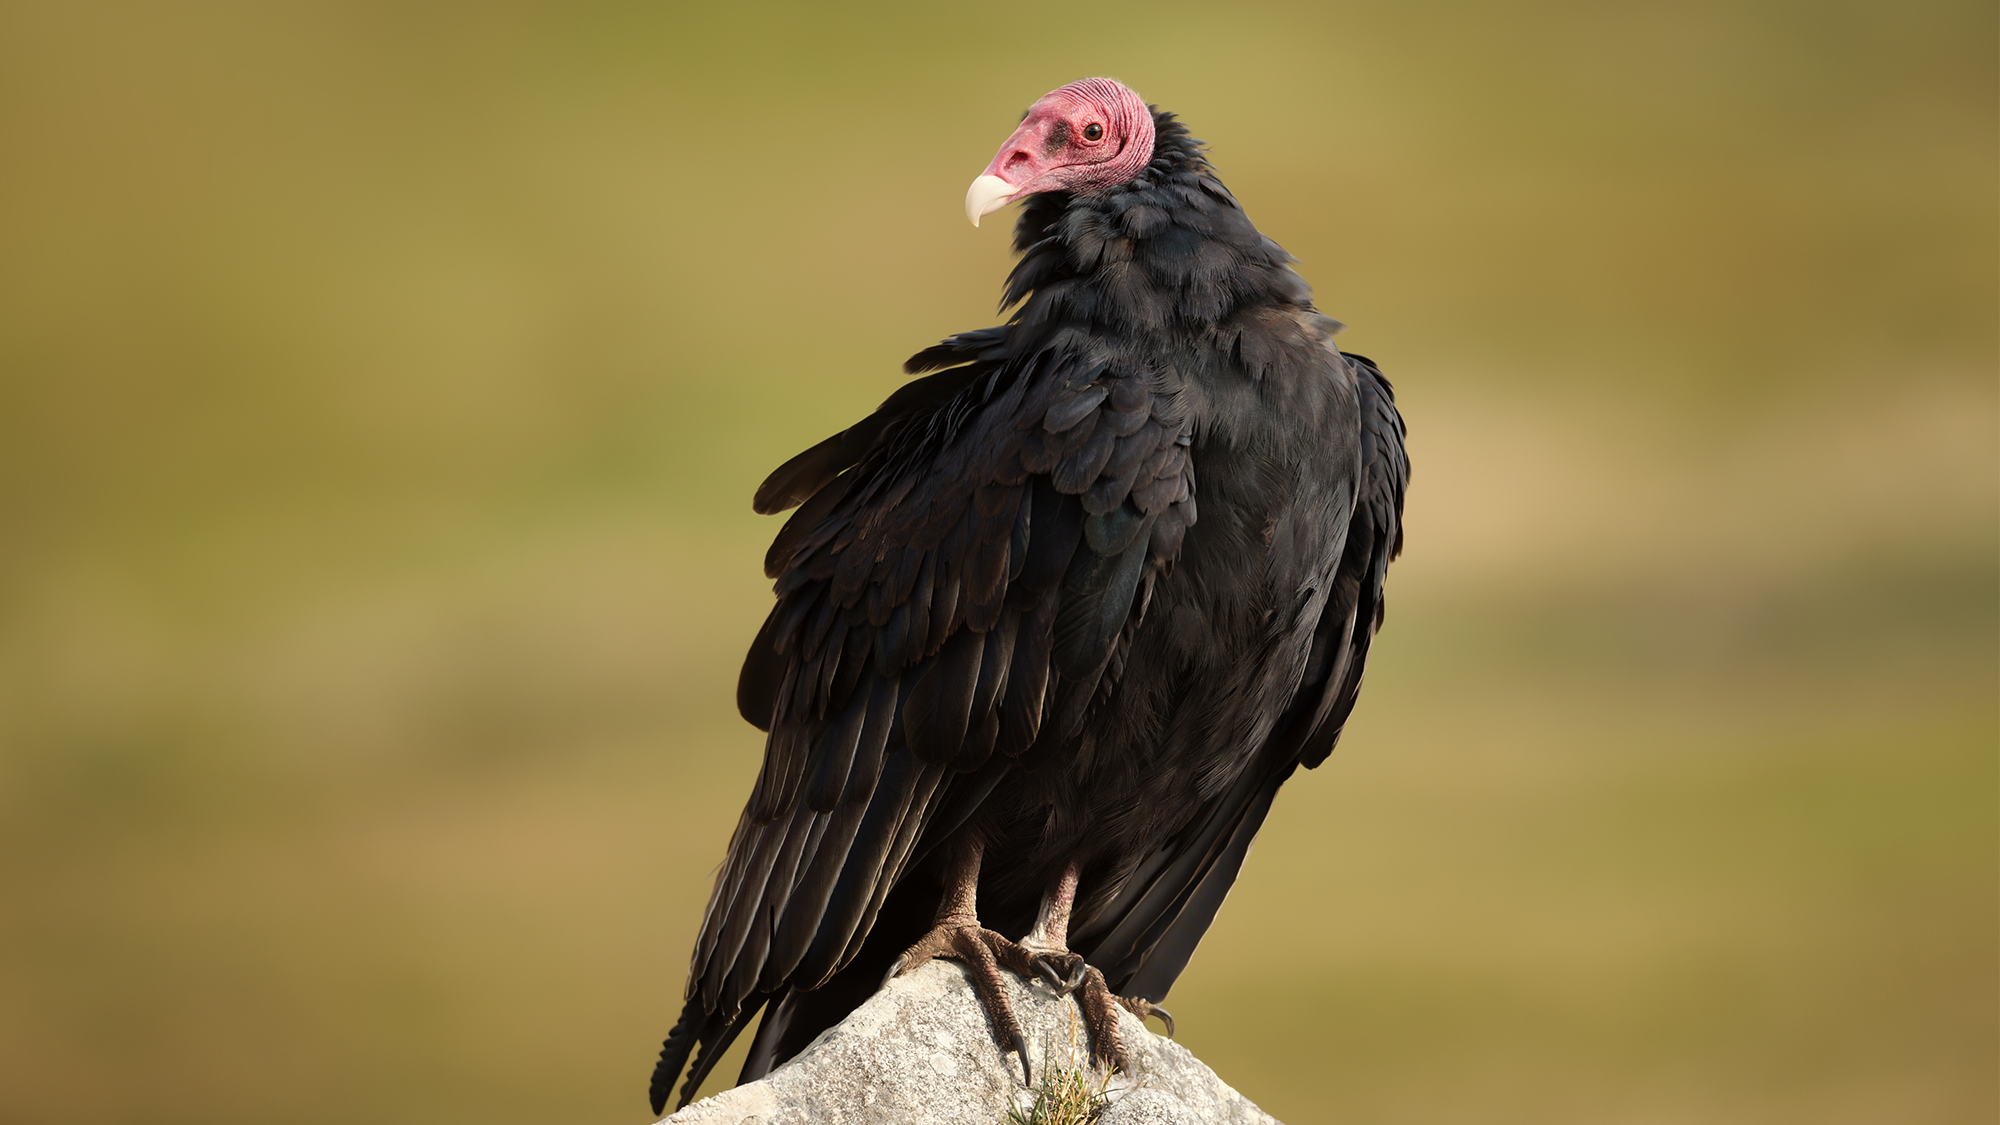 Learning to love vultures in order to save them